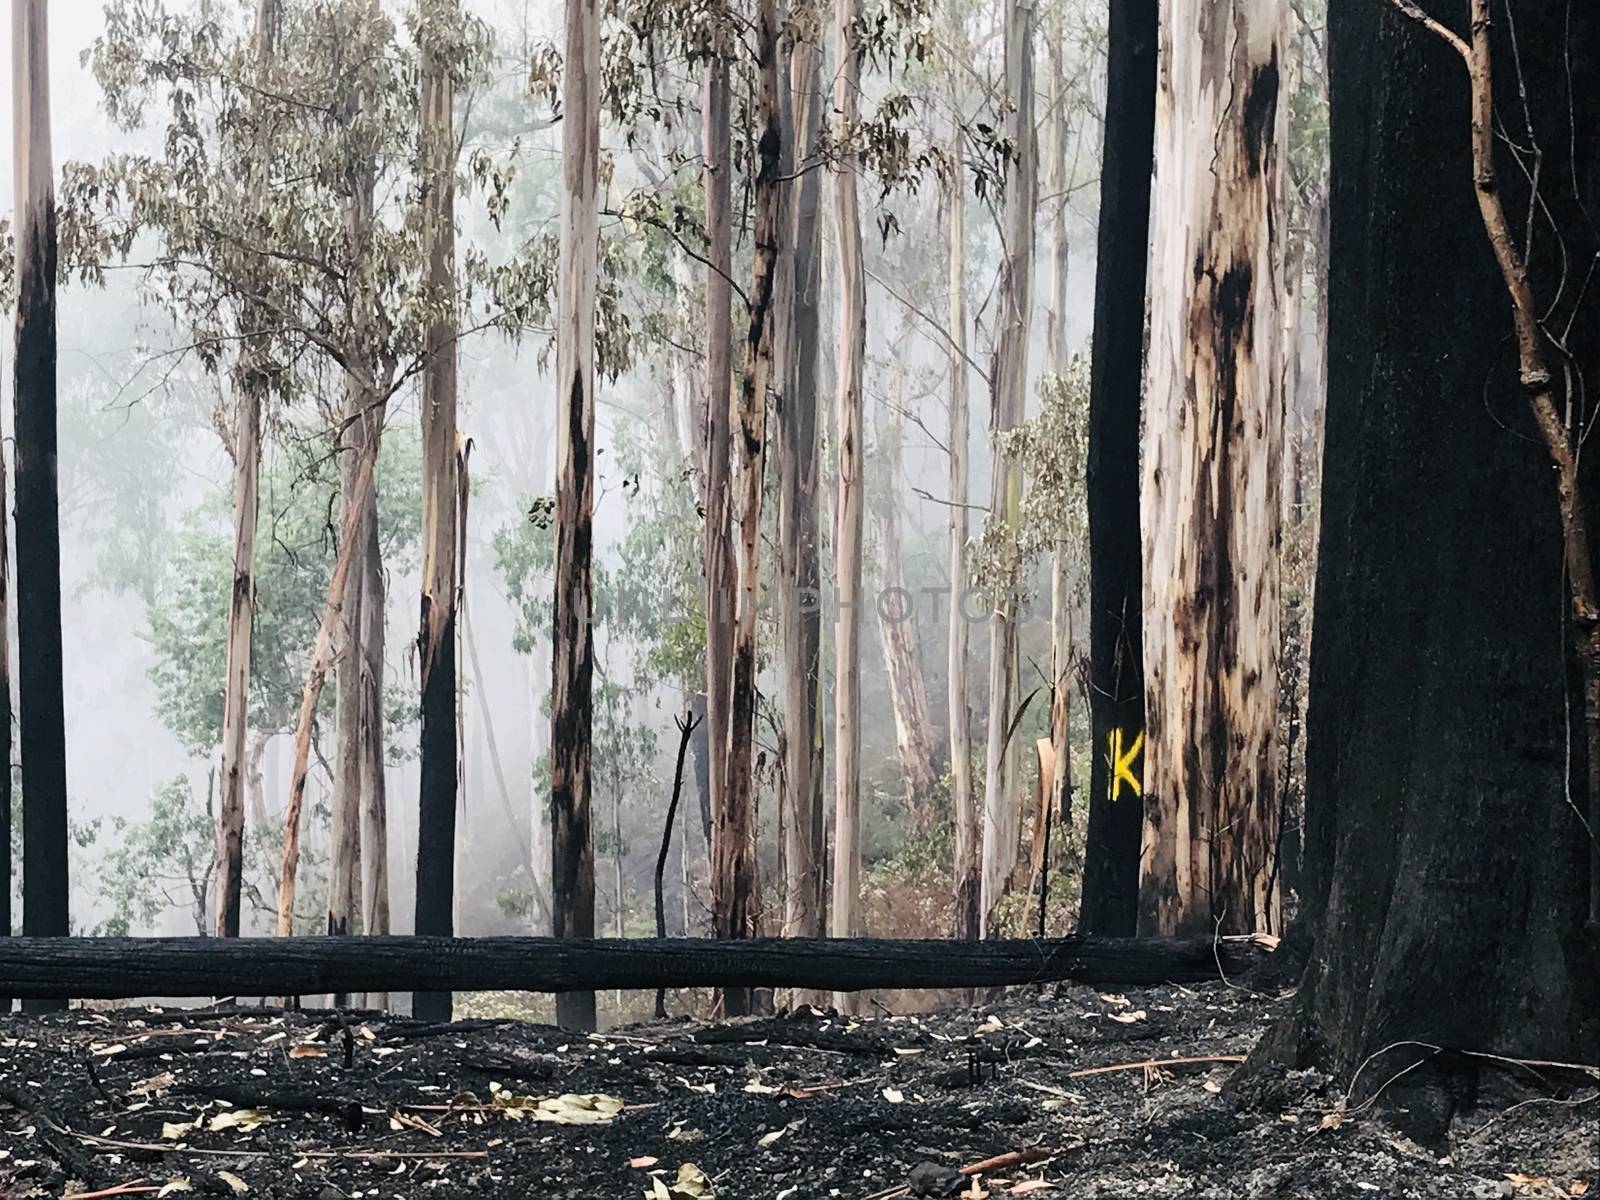 Australian outback post-bushfire with a yellow K on a tree, meaning Killer Tree - a tree that will fall imminently.